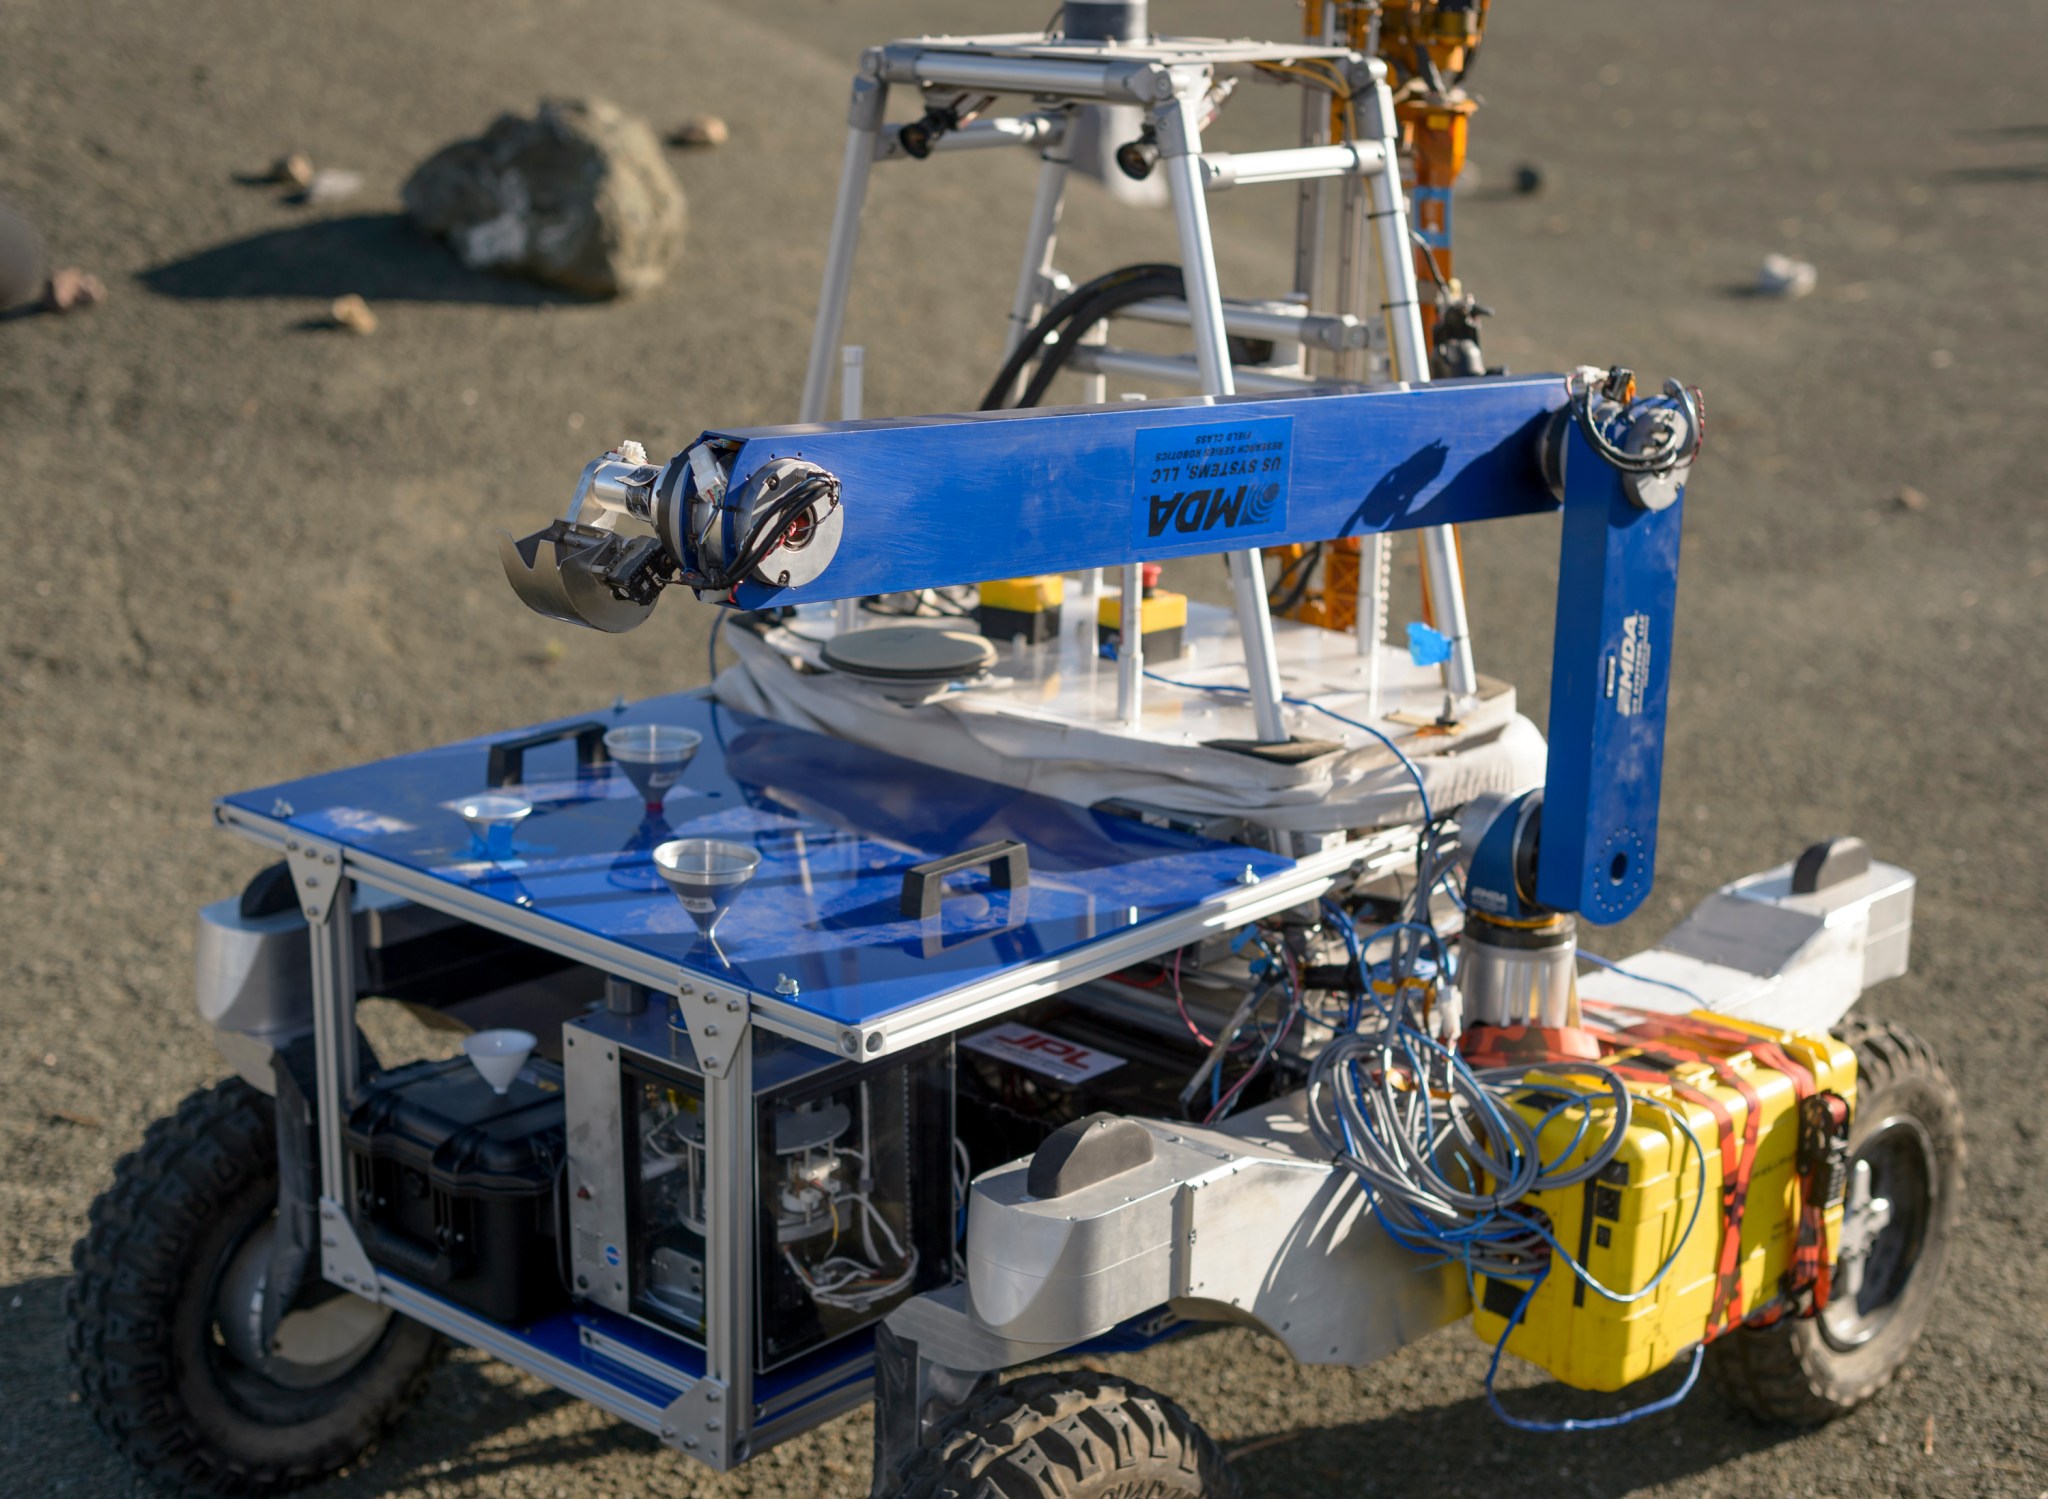 The metal scoop at the end of the robotic arm delivers soil samples through the funnels to life-detection instruments below.